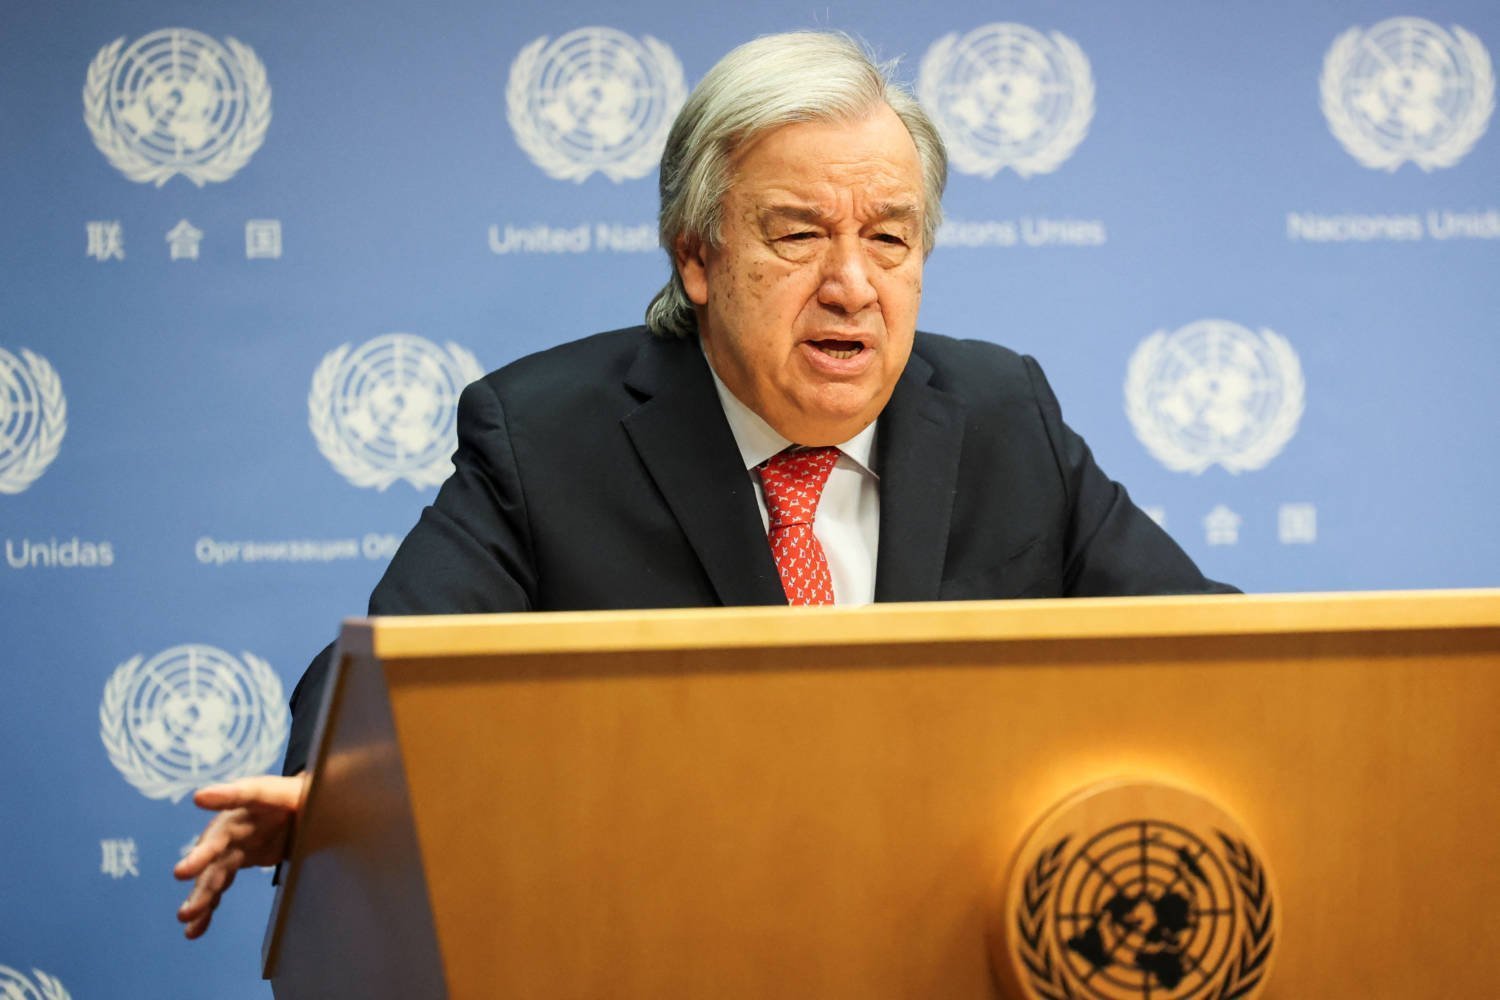 United Nations Secretary General Antonio Guterres Speaks At The United Nations Headquarters In New York